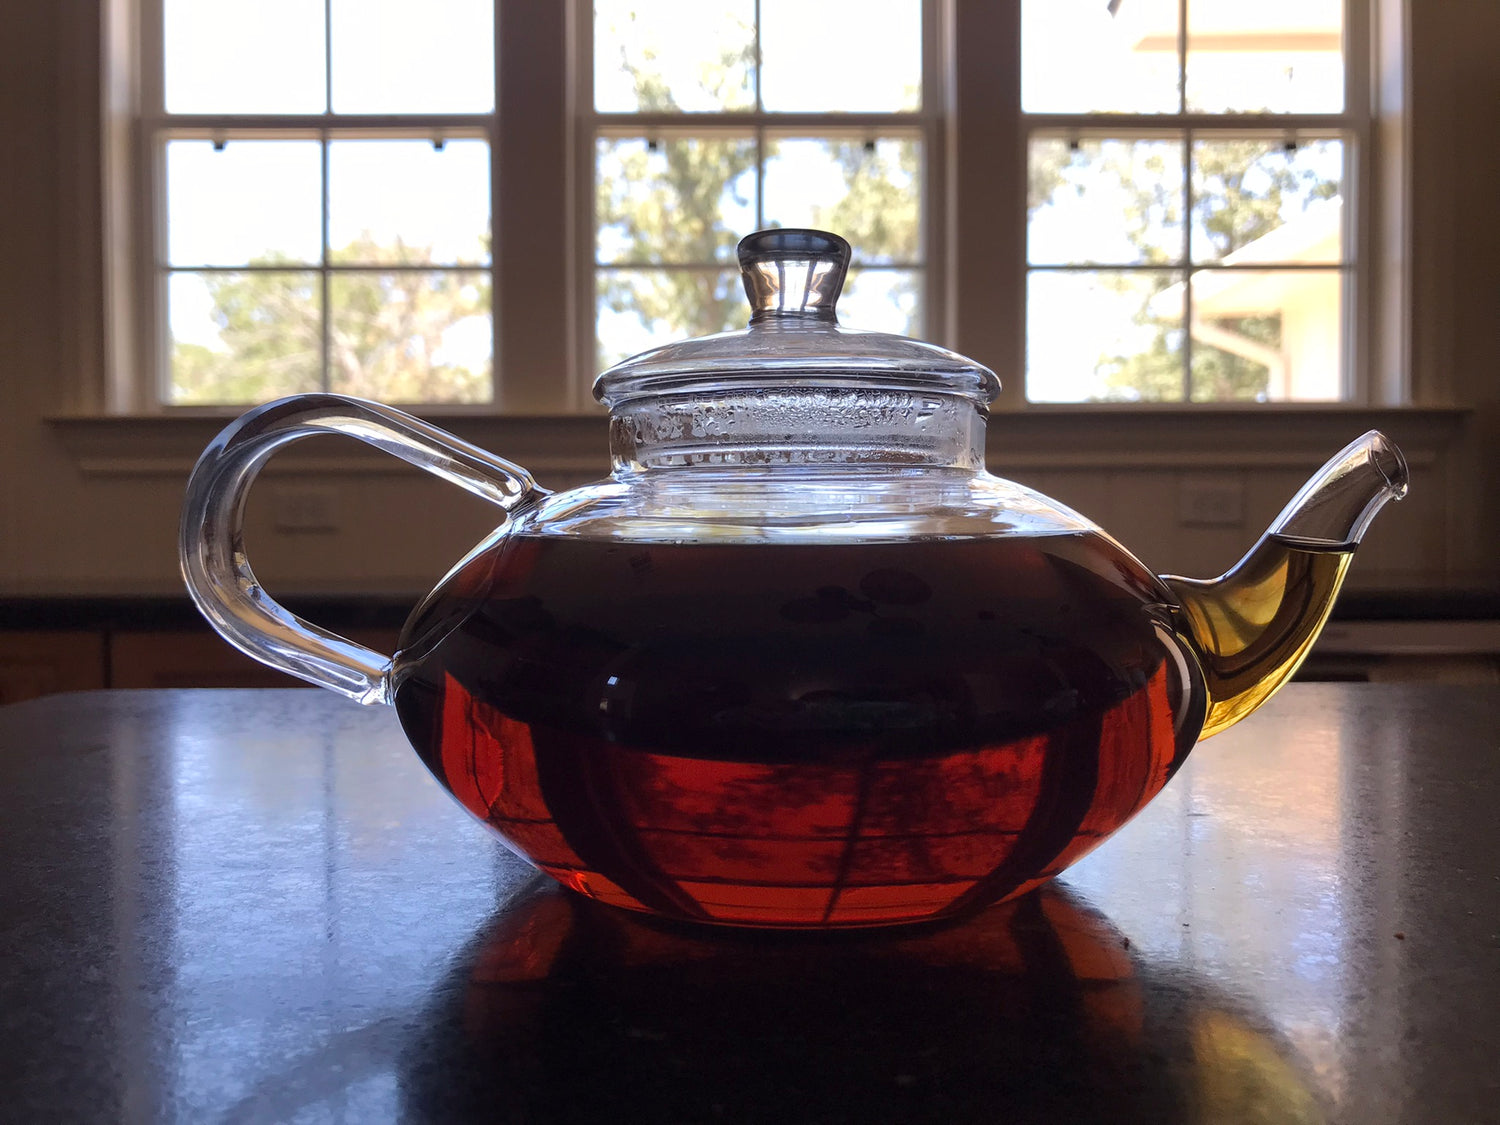 Yaupon is a delicious alternative to coffee and tea. We call it "America's Own Tea."